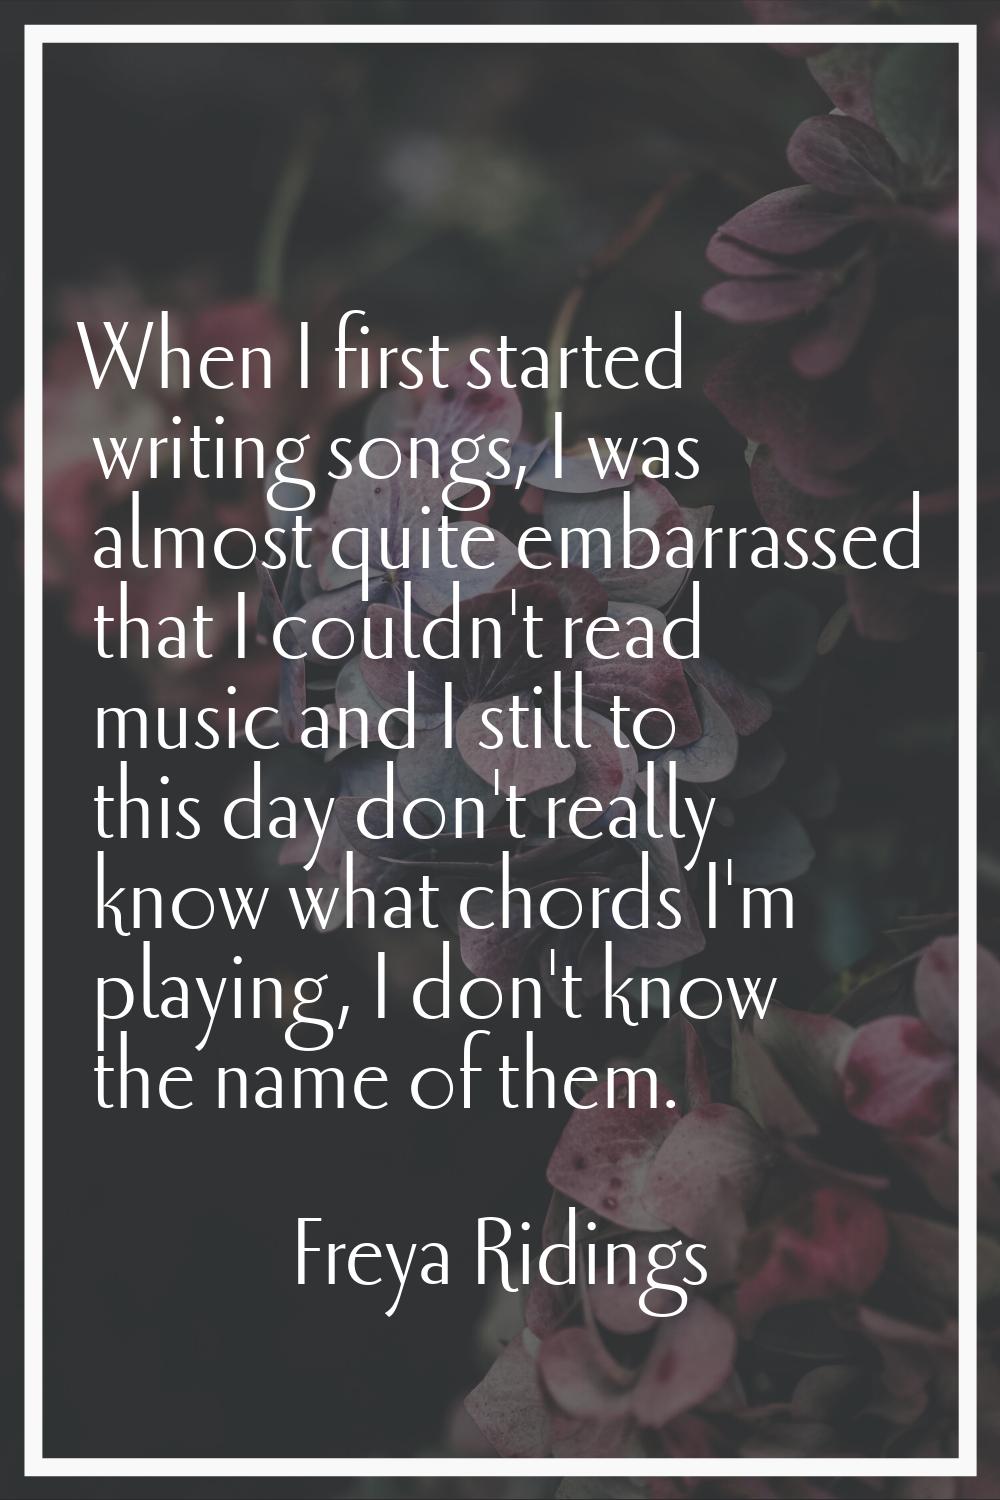 When I first started writing songs, I was almost quite embarrassed that I couldn't read music and I